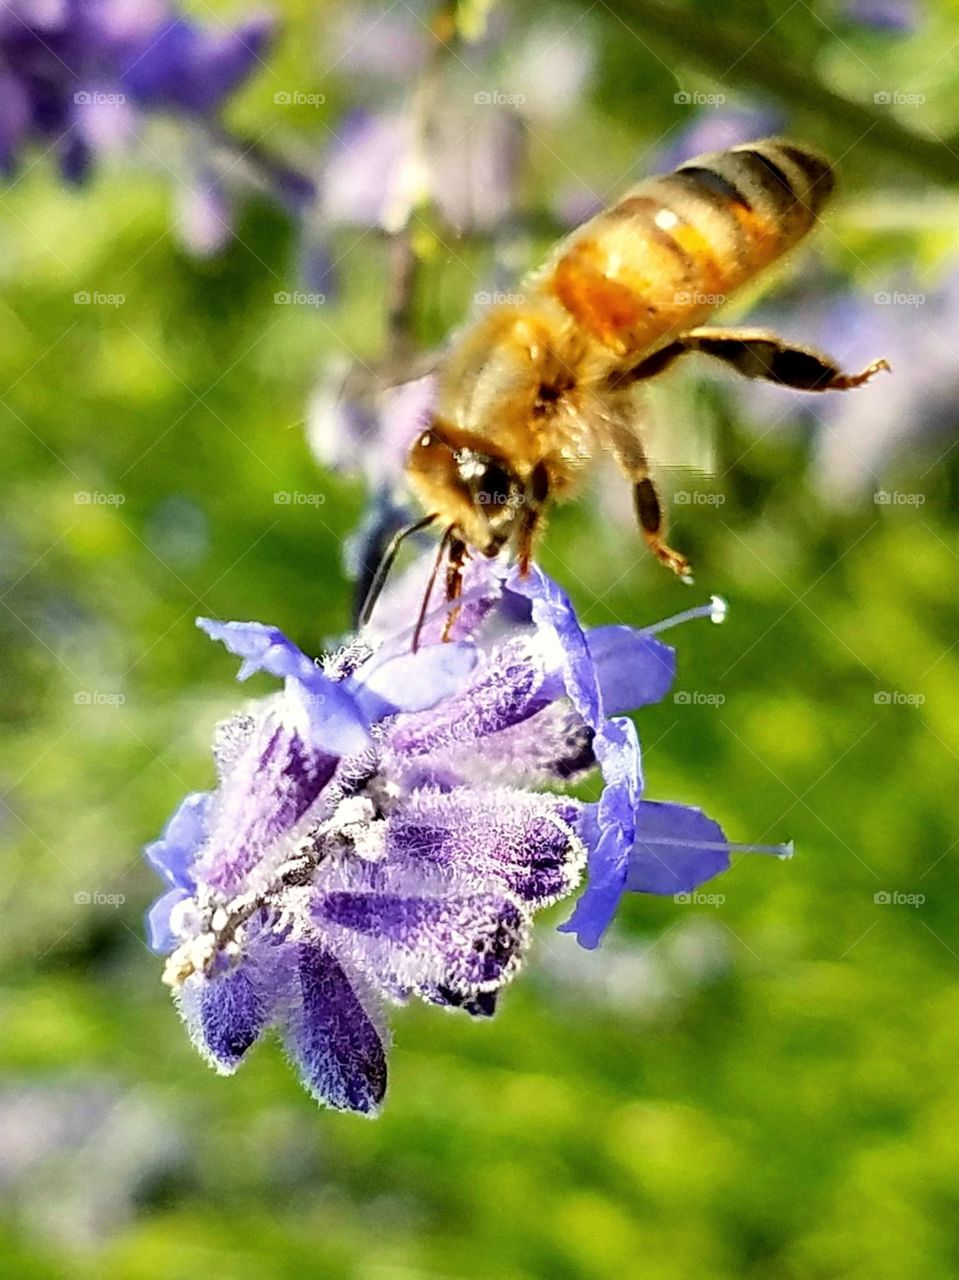 A bee poised on one leg while gathering nectar from a lavender blossom